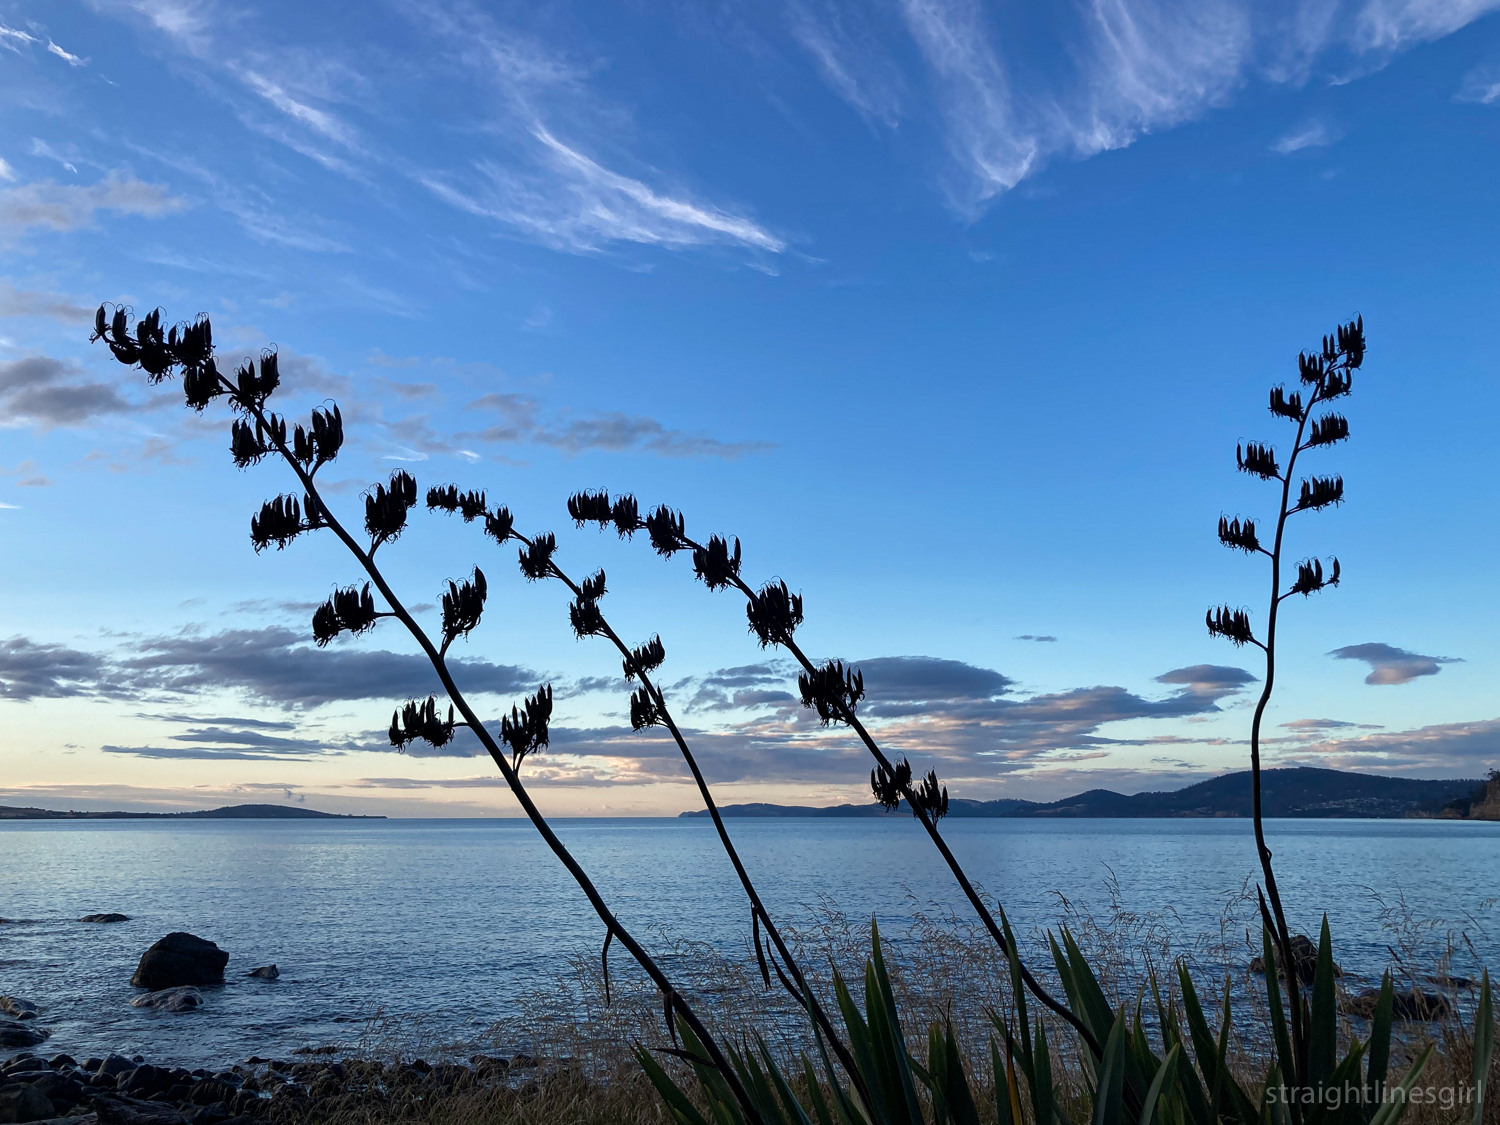 Four large flax strands in front of a morning river scene with blue sky and whispy clouds